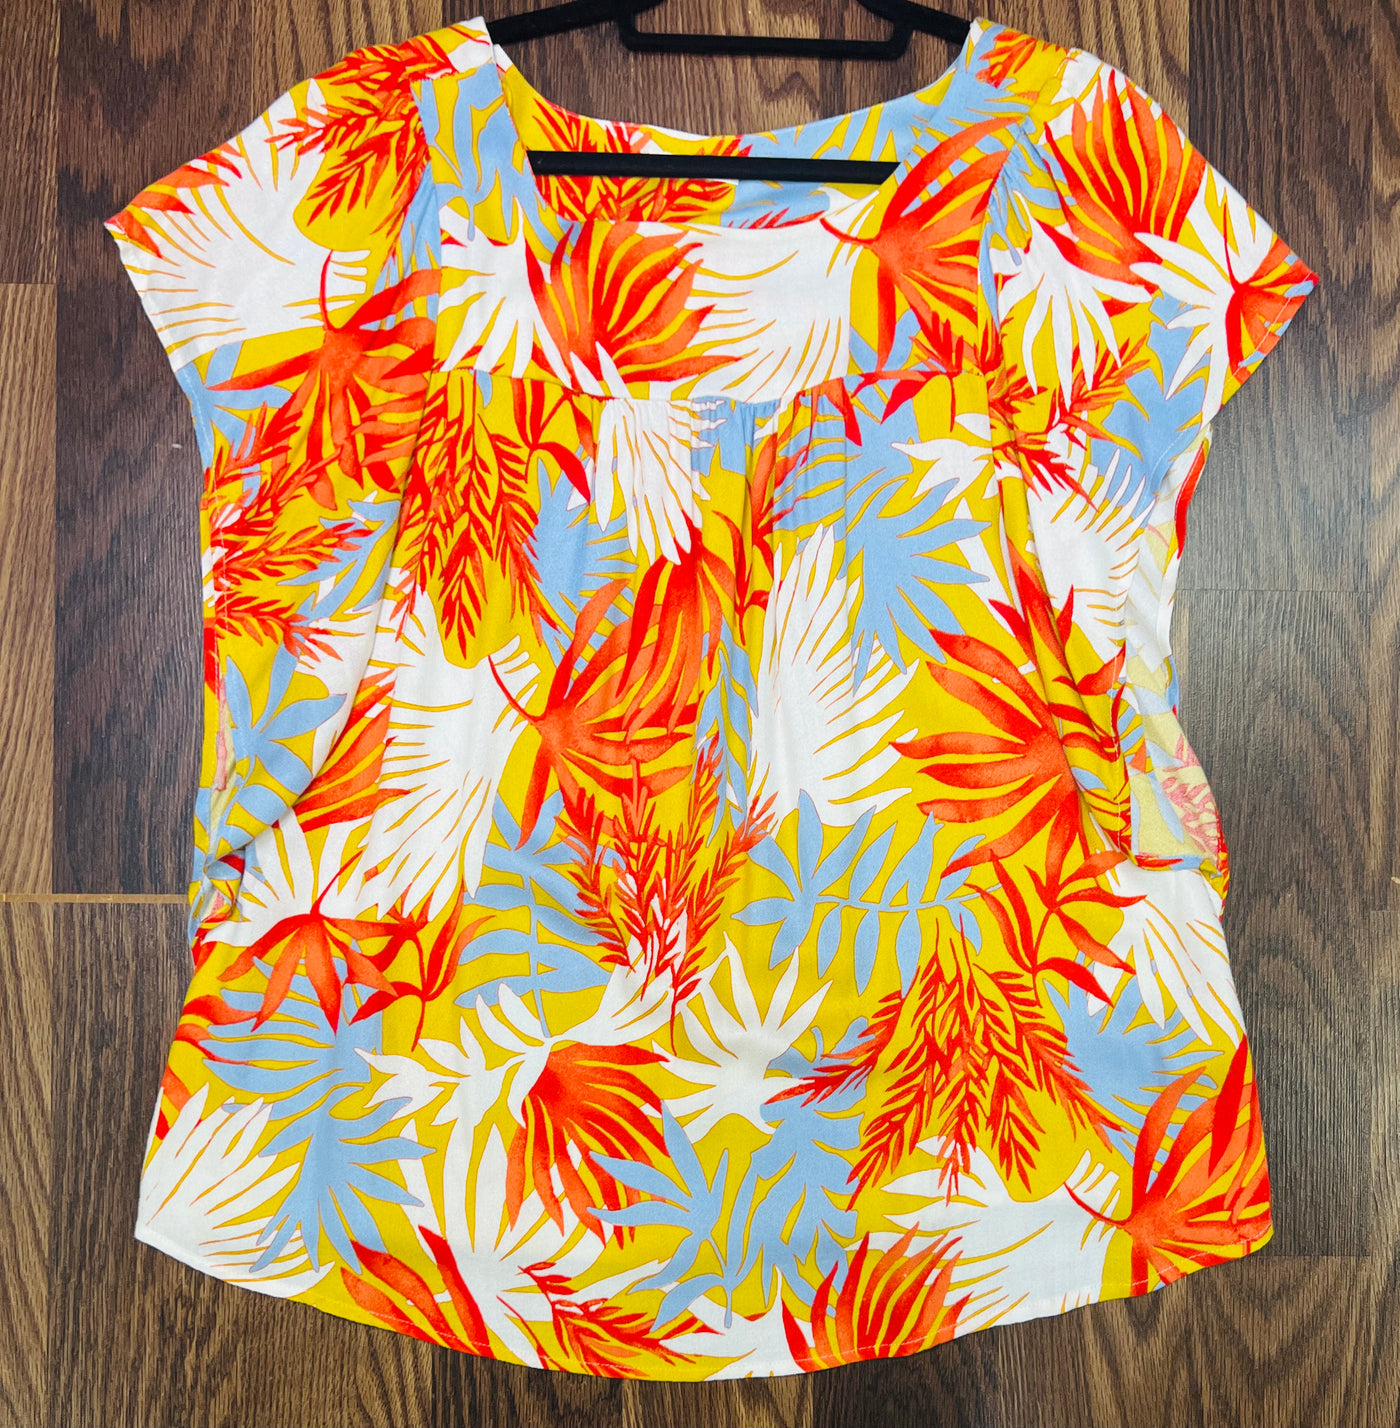 Floral Print Vacation Top